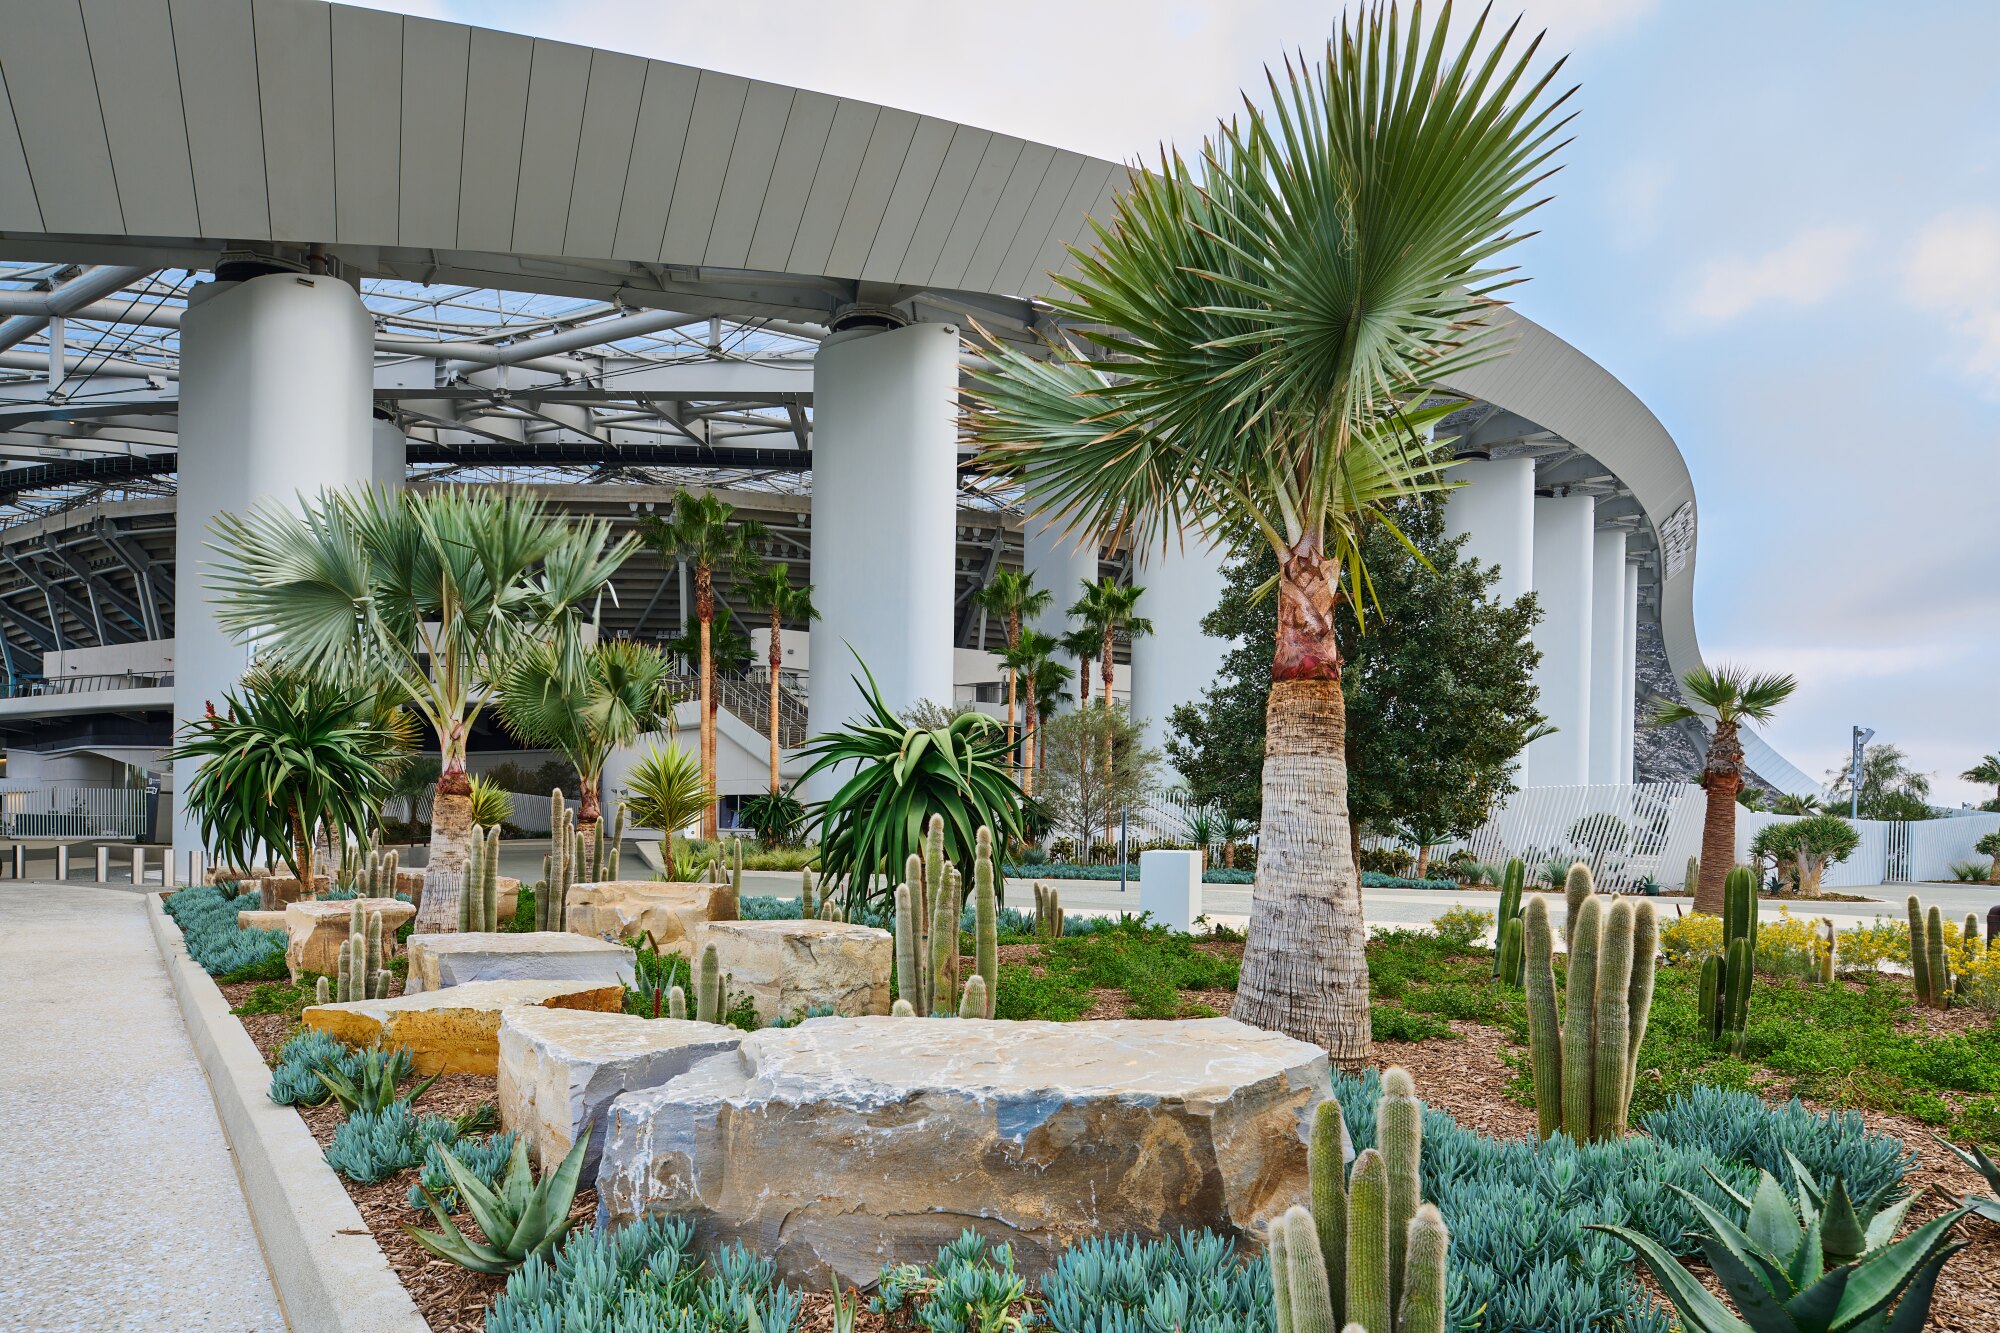 SoFi Stadium's undulating roofline can be seen behind a desert garden with rocks, cacti, aloes and other succulents.